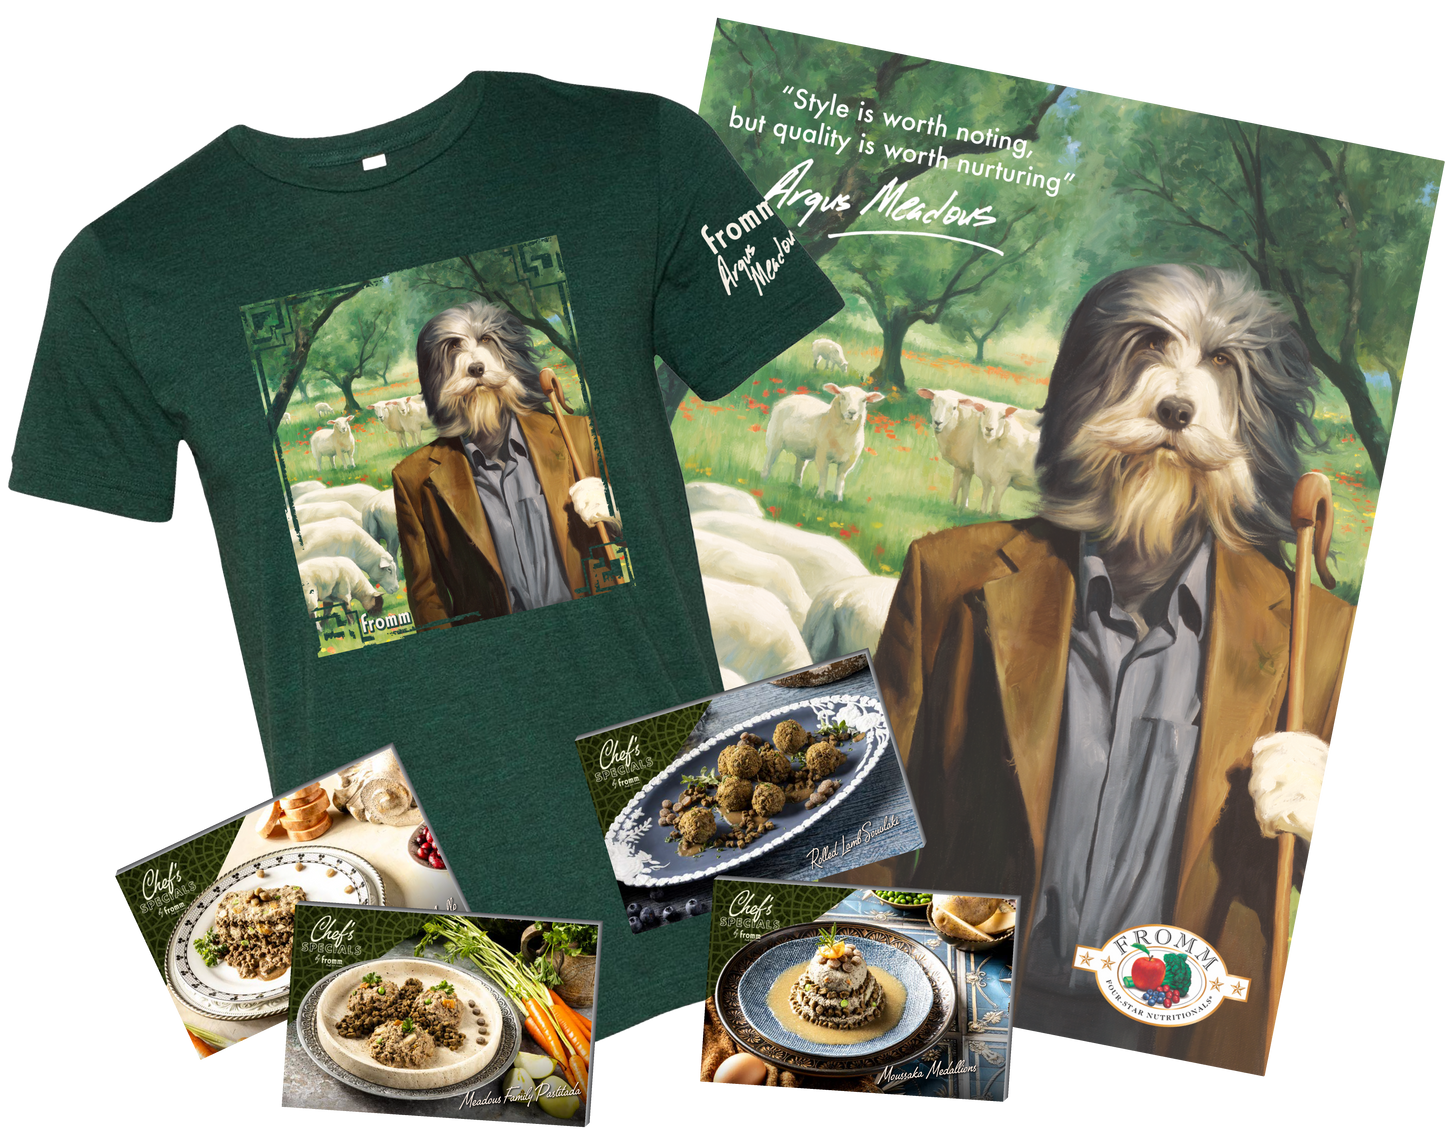 Chef's Specials Argus Meadous | Merchandise Kit: Shirt + Posters + Recipe Cards